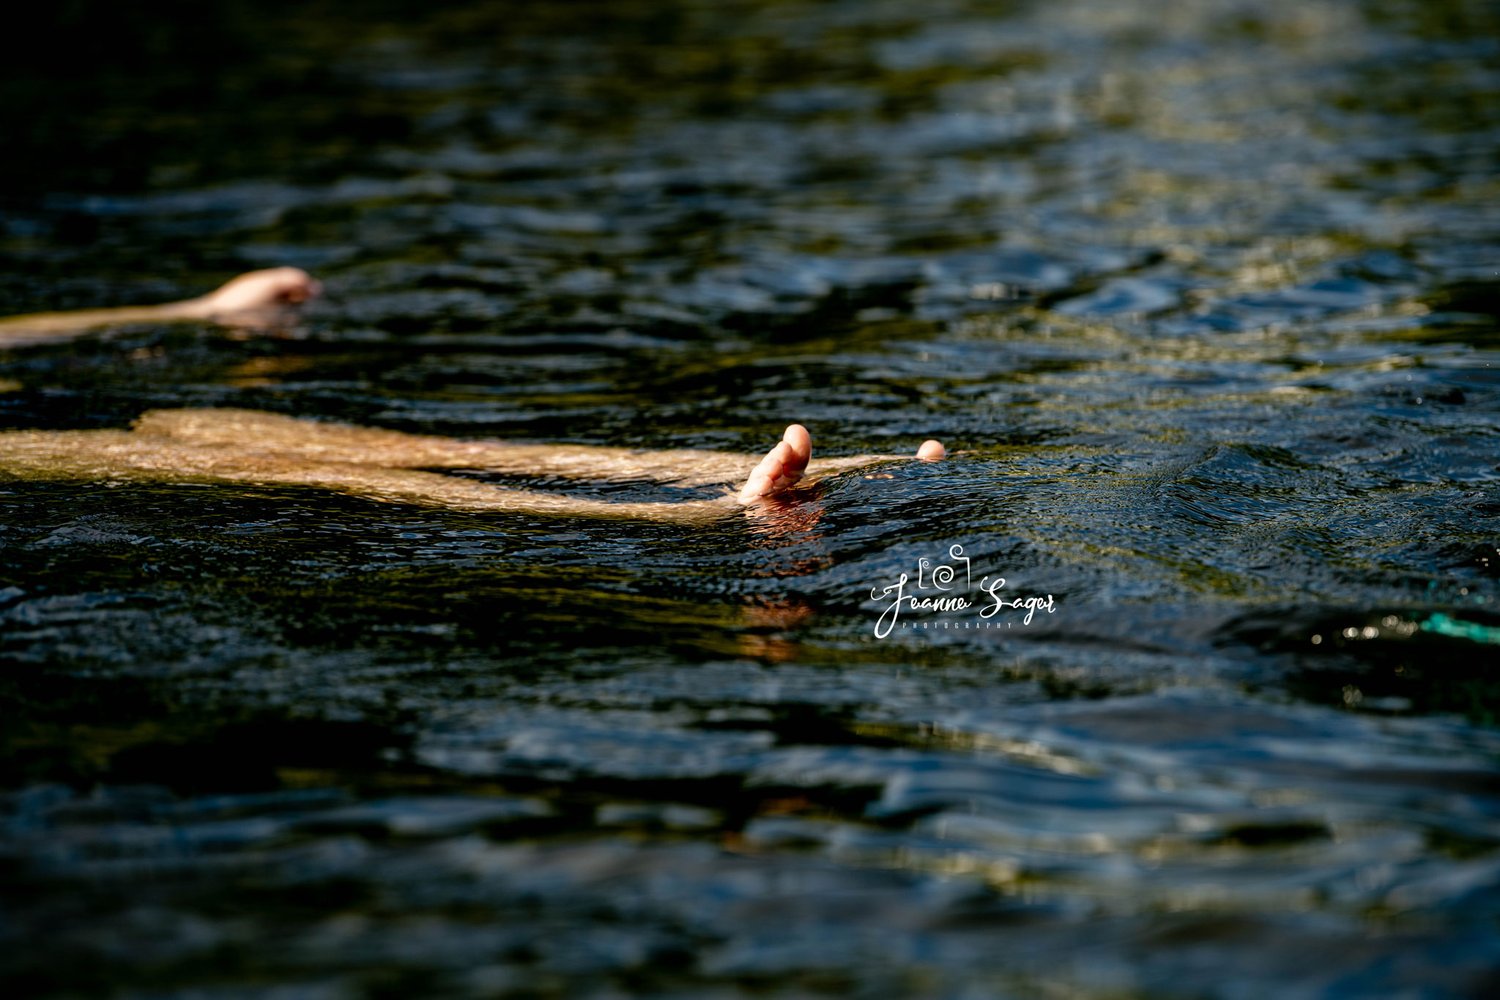 A child is seen floating in the Delaware River with toes sticking out of the water